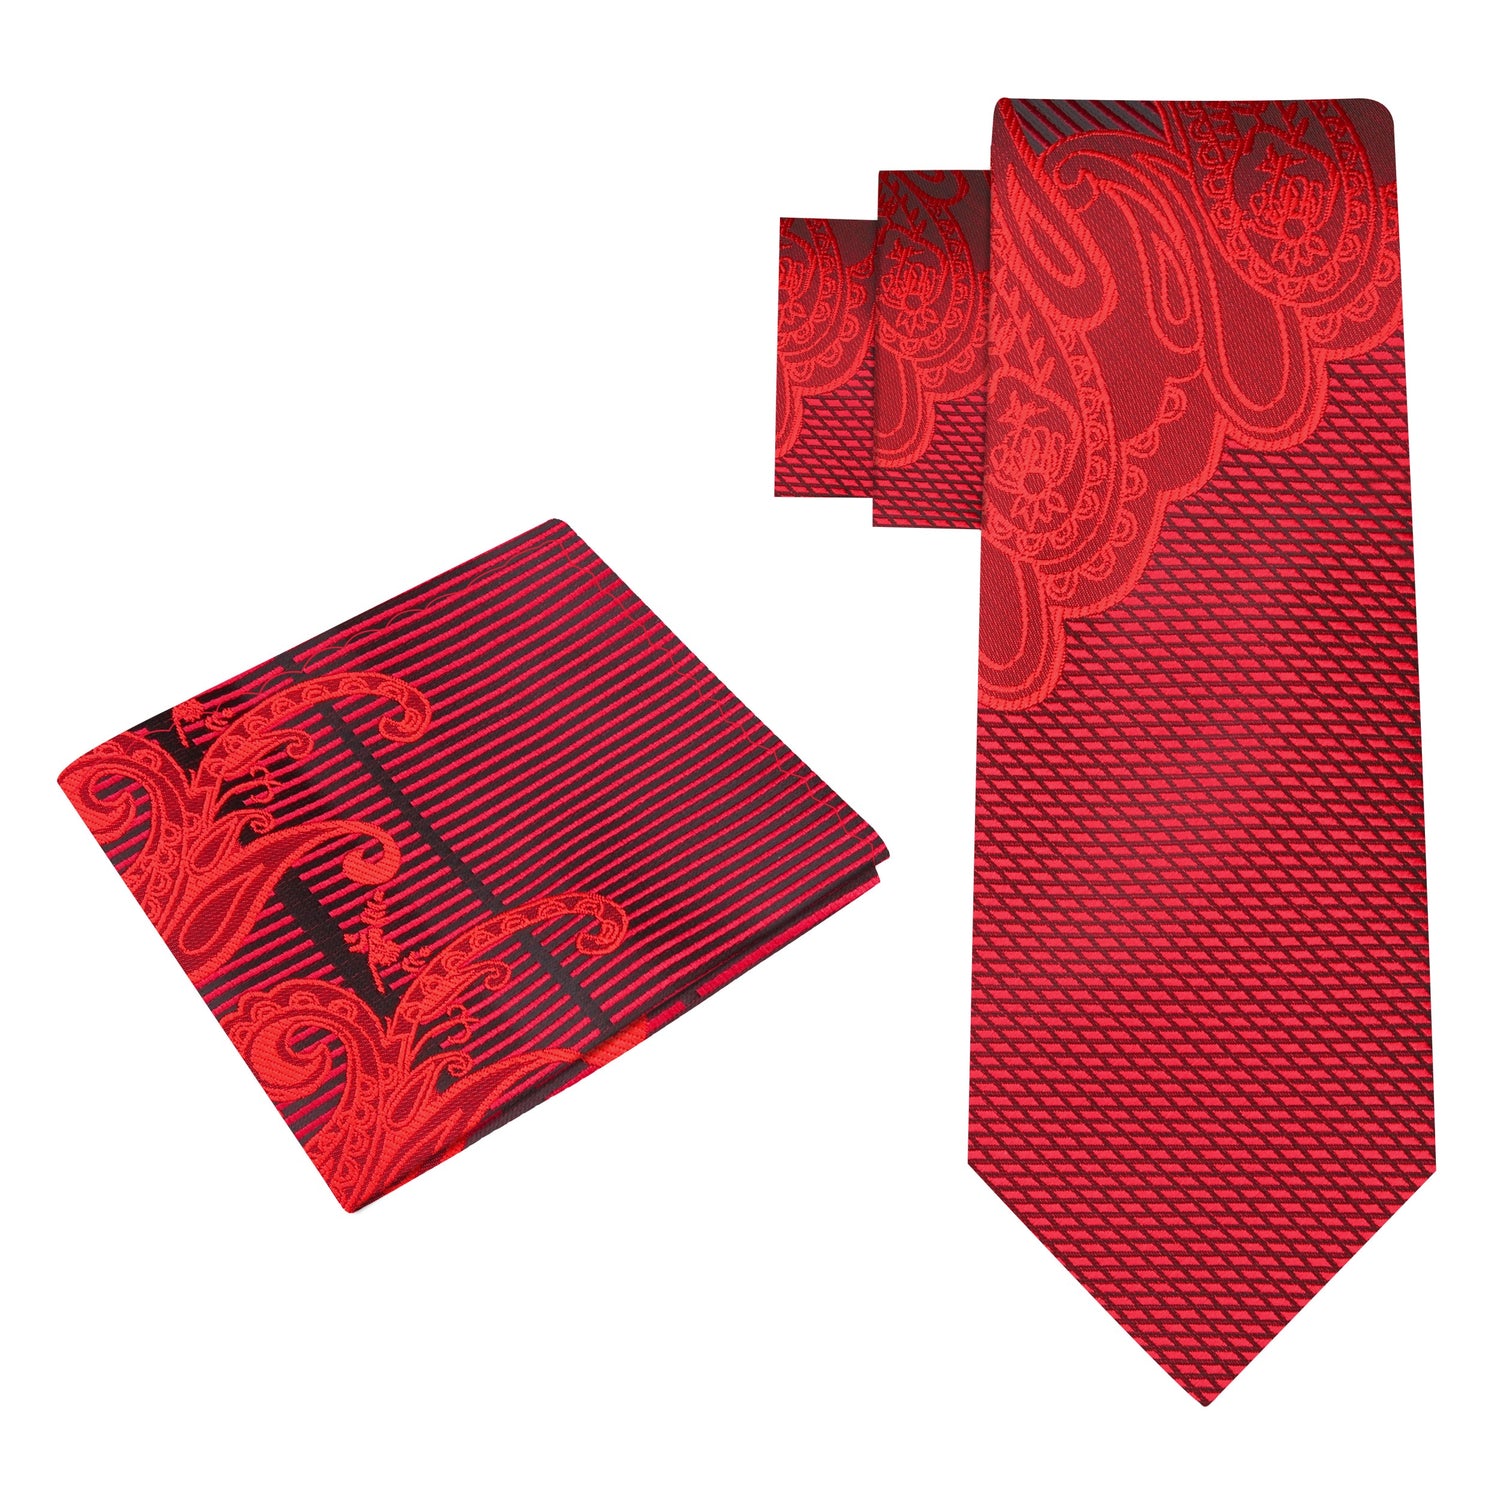 Alt View: Coach PRIME Deion Sanders Shades of Red Paisley Tie and Pocket Square